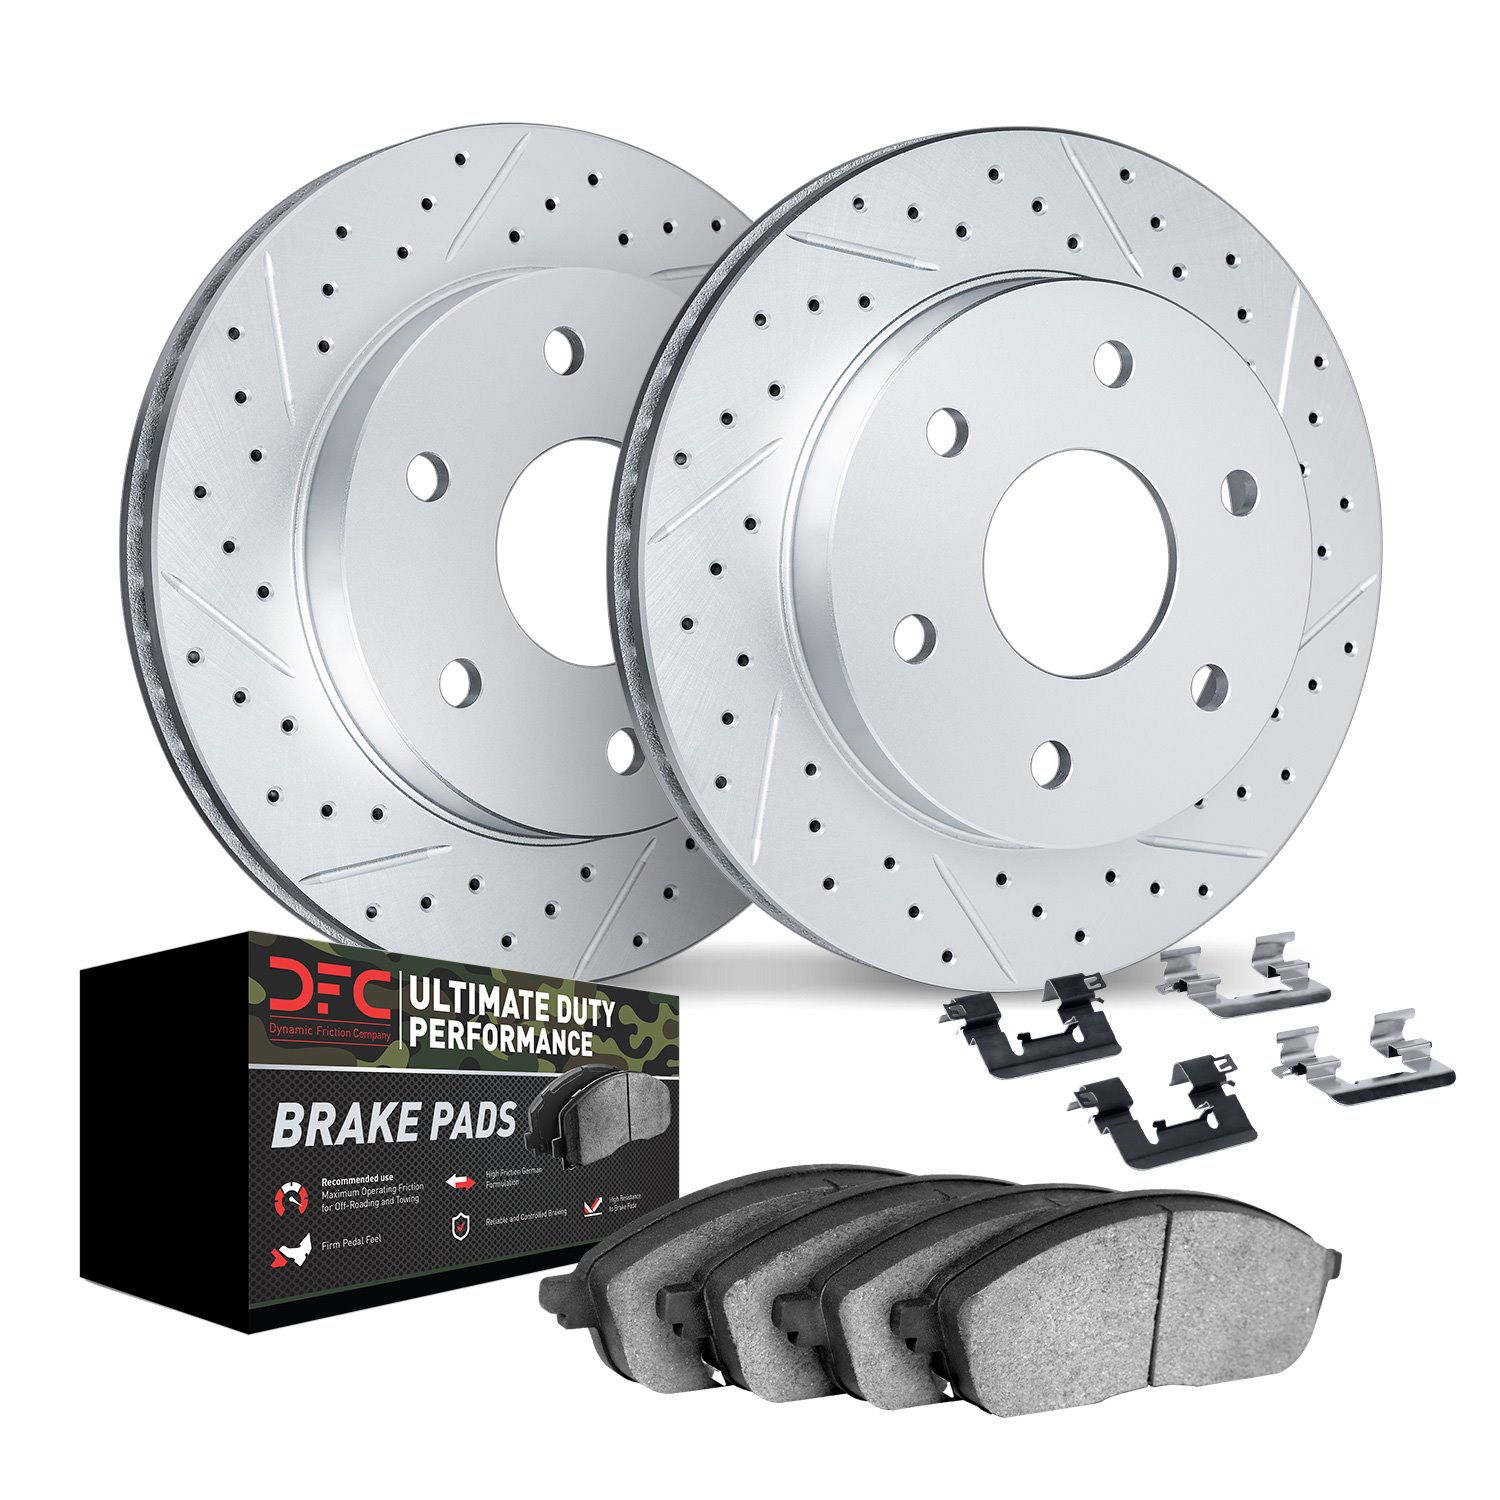 2412-47011 Geoperformance Drilled/Slotted Brake Rotors with Ultimate-Duty Brake Pads Kit & Hardware, Fits Select GM, Position: R